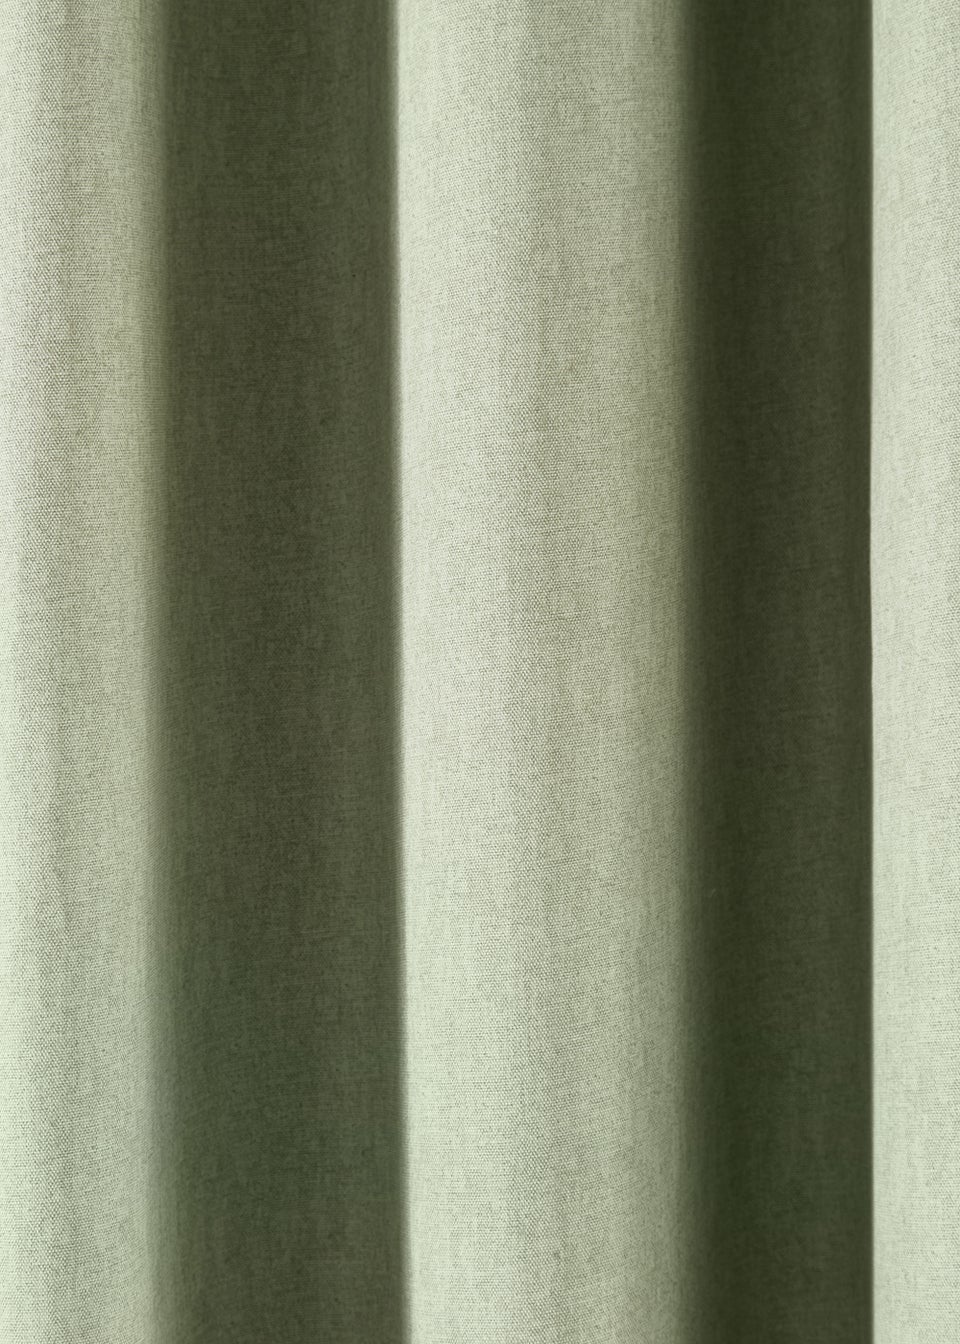 Fusion Sorbonne Eyelet Curtains